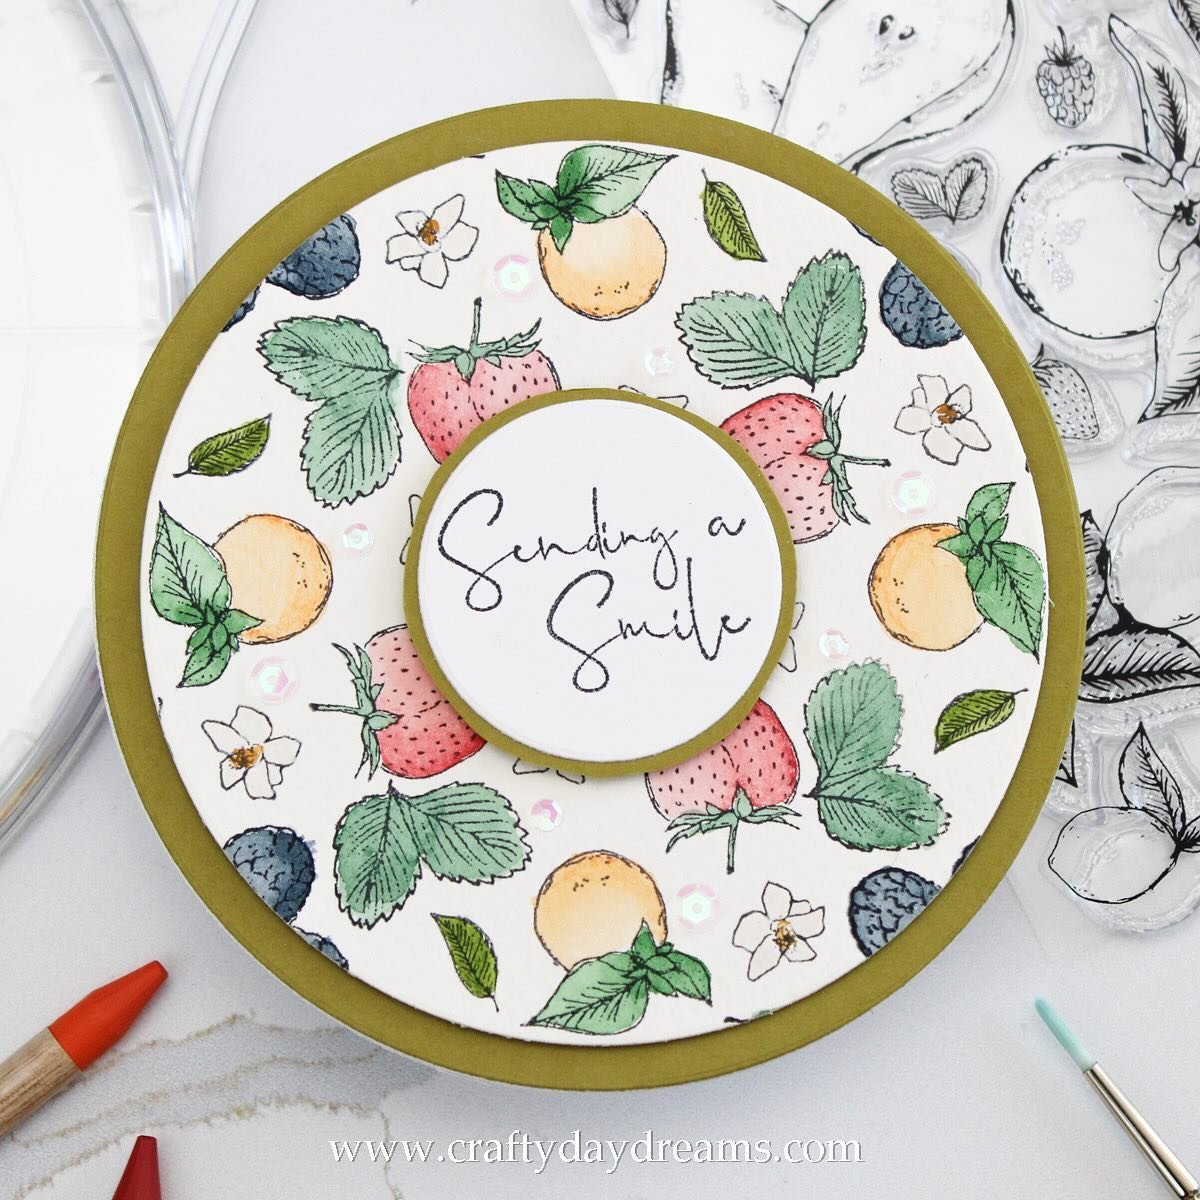 Happy Wednesday!

Today I&rsquo;m back with two more cards featuring products and the Stamp &amp; Spin from @sizzix 😍. I&rsquo;m not lying when I say I had so much fun creating with the Stamp &amp; Spin!! I think it&rsquo;s becoming one of my favori